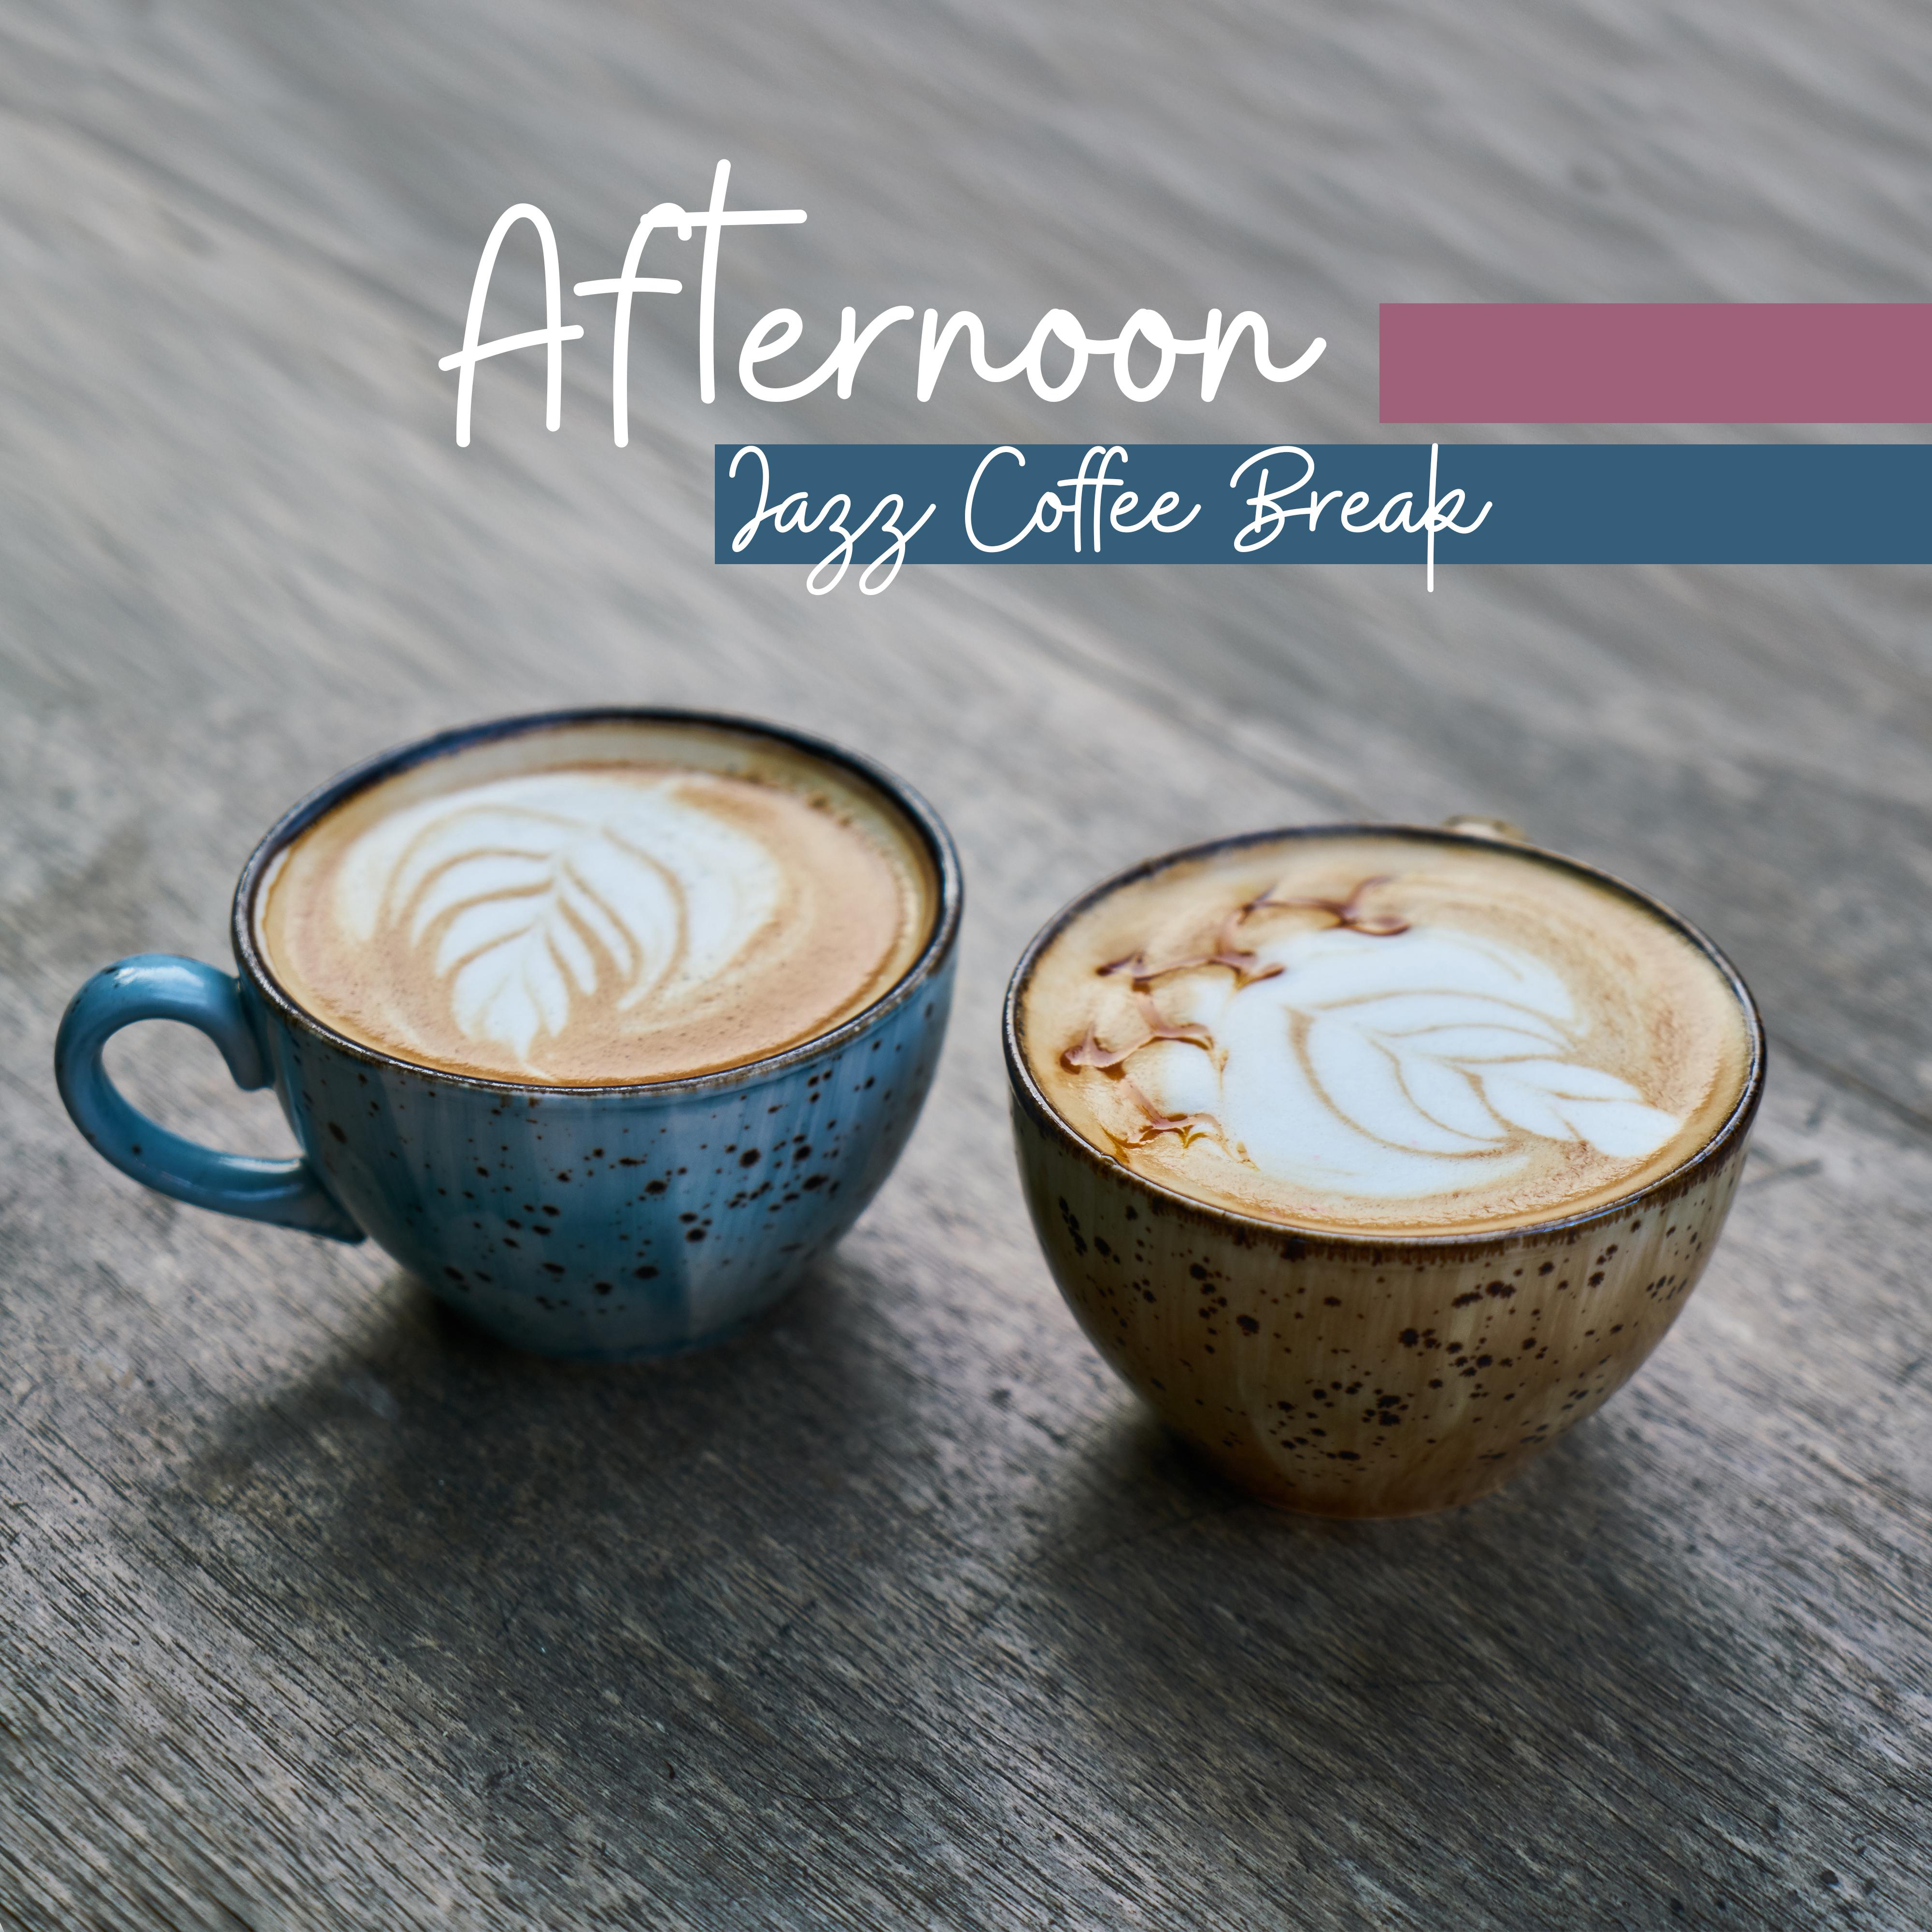 Afternoon Jazz Coffee Break: 2019 Instrumental Smooth Jazz Selection, Music Perfect for Meeting with Love or Friends, Delicate Melodies with Sounds of Piano, Contrabass, Trumpet & More